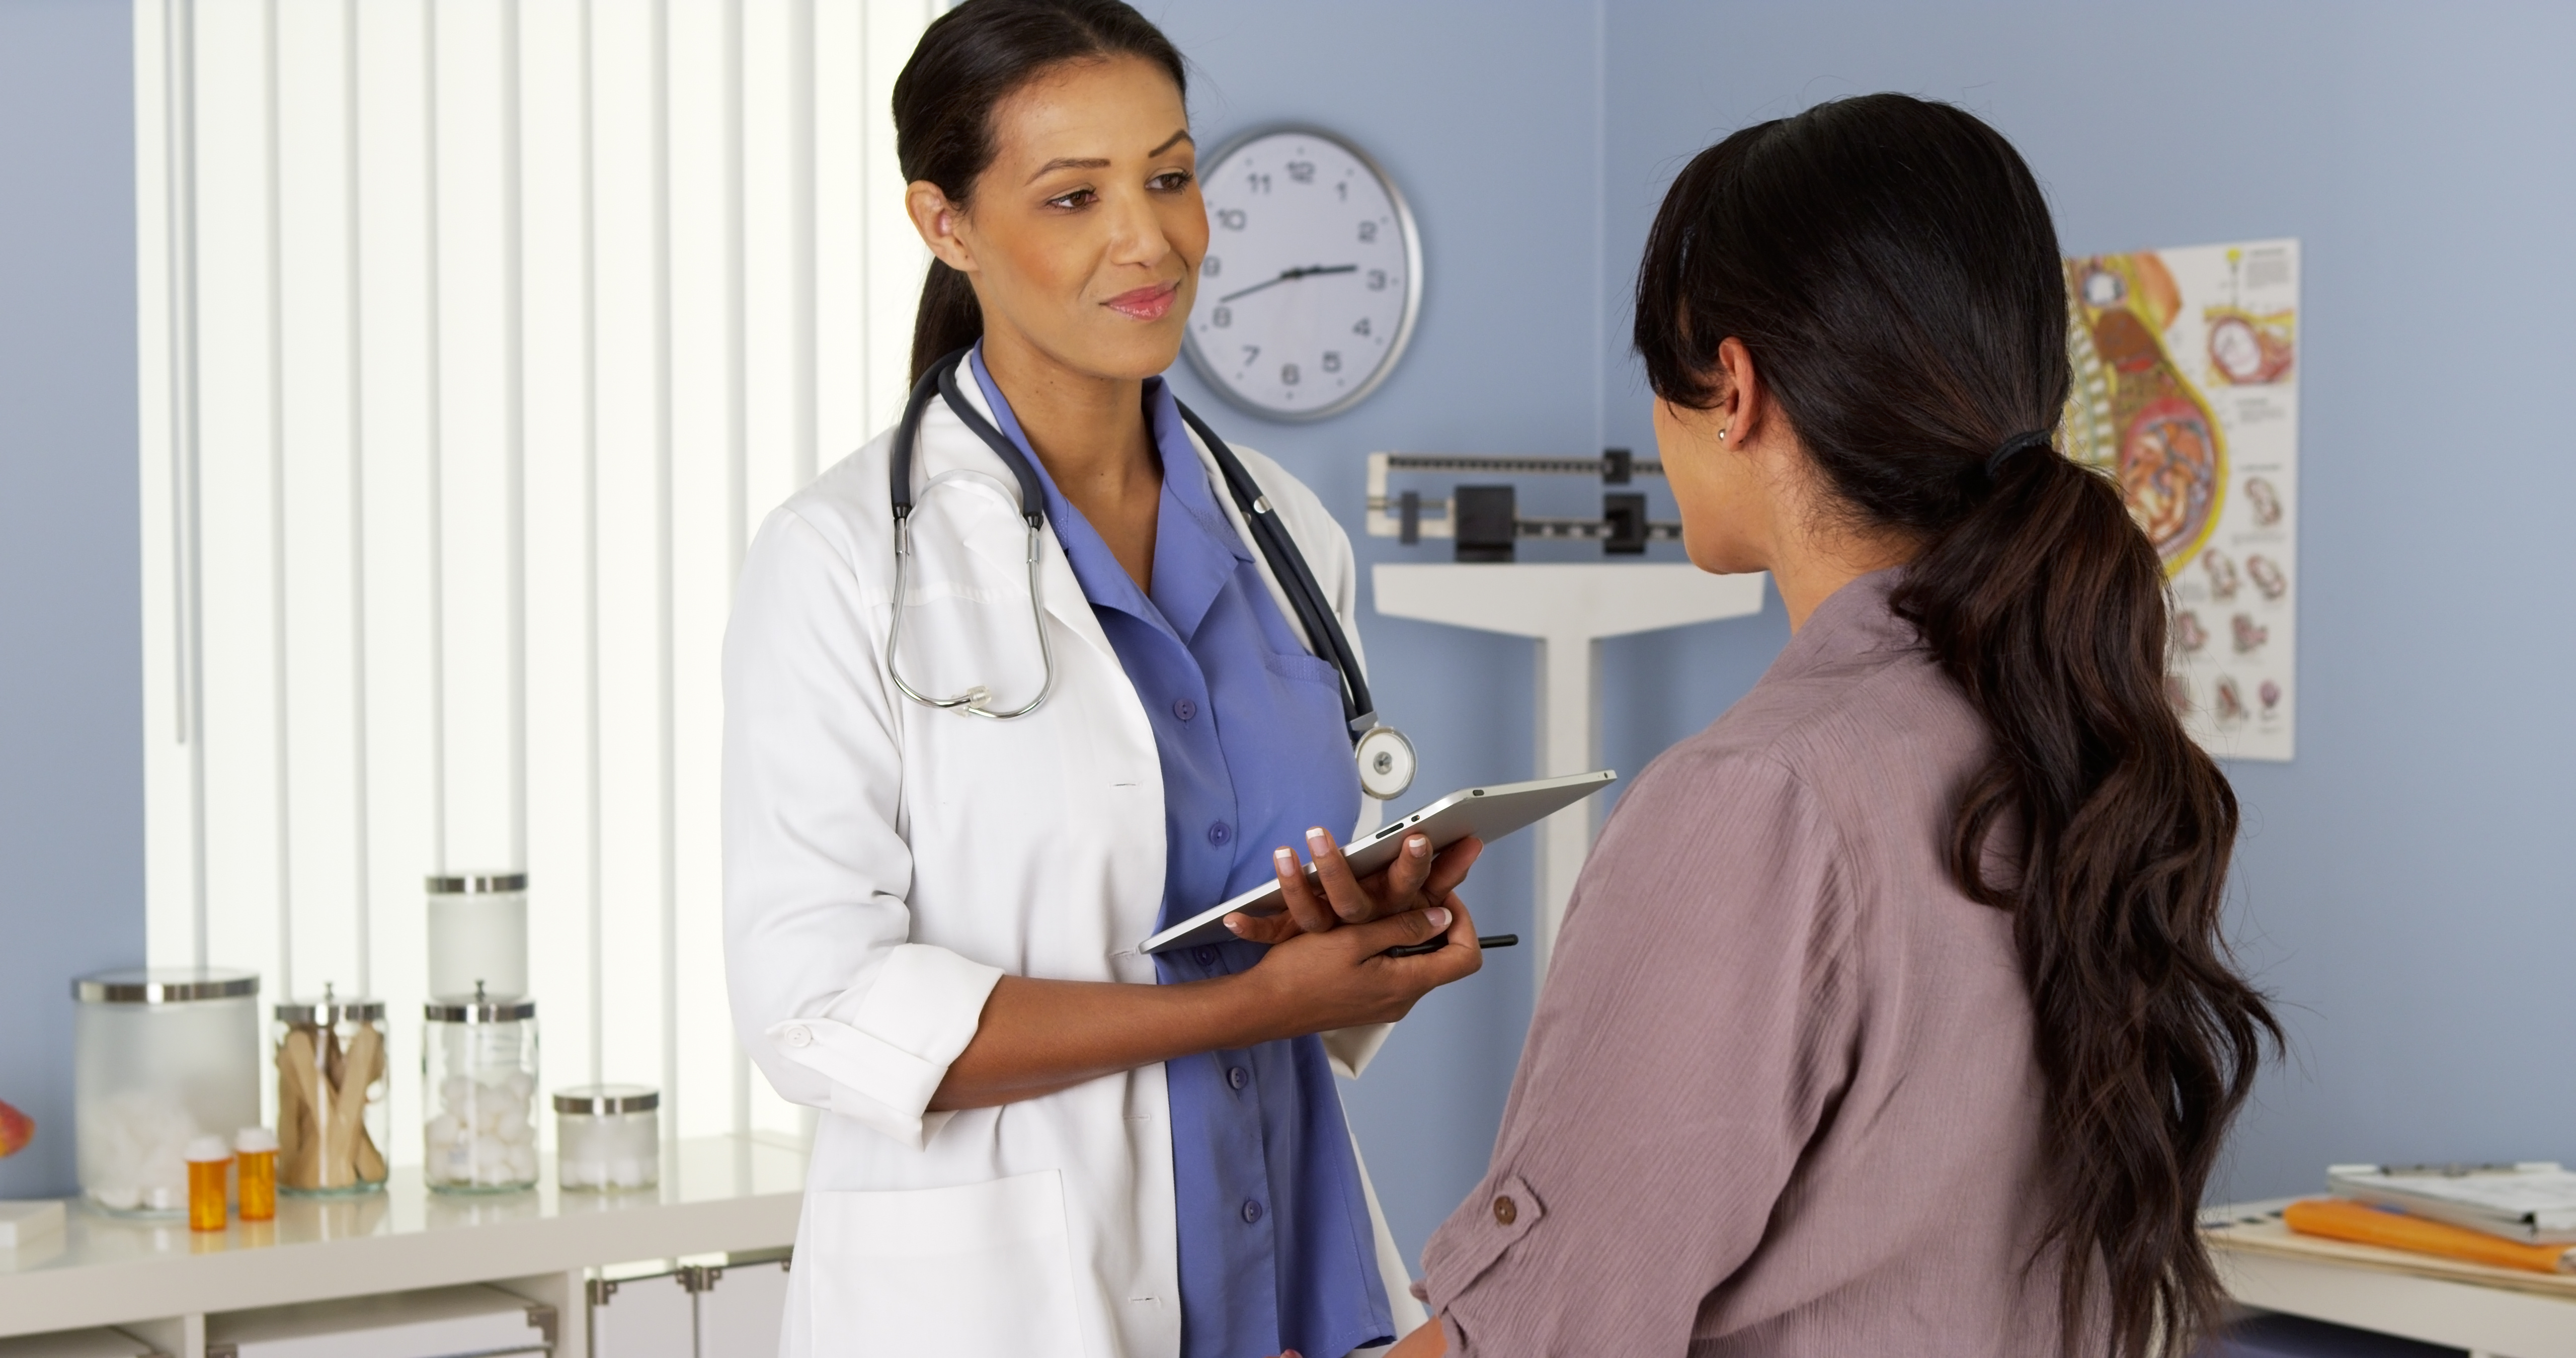 Female doctor with tablet speaking to female patient